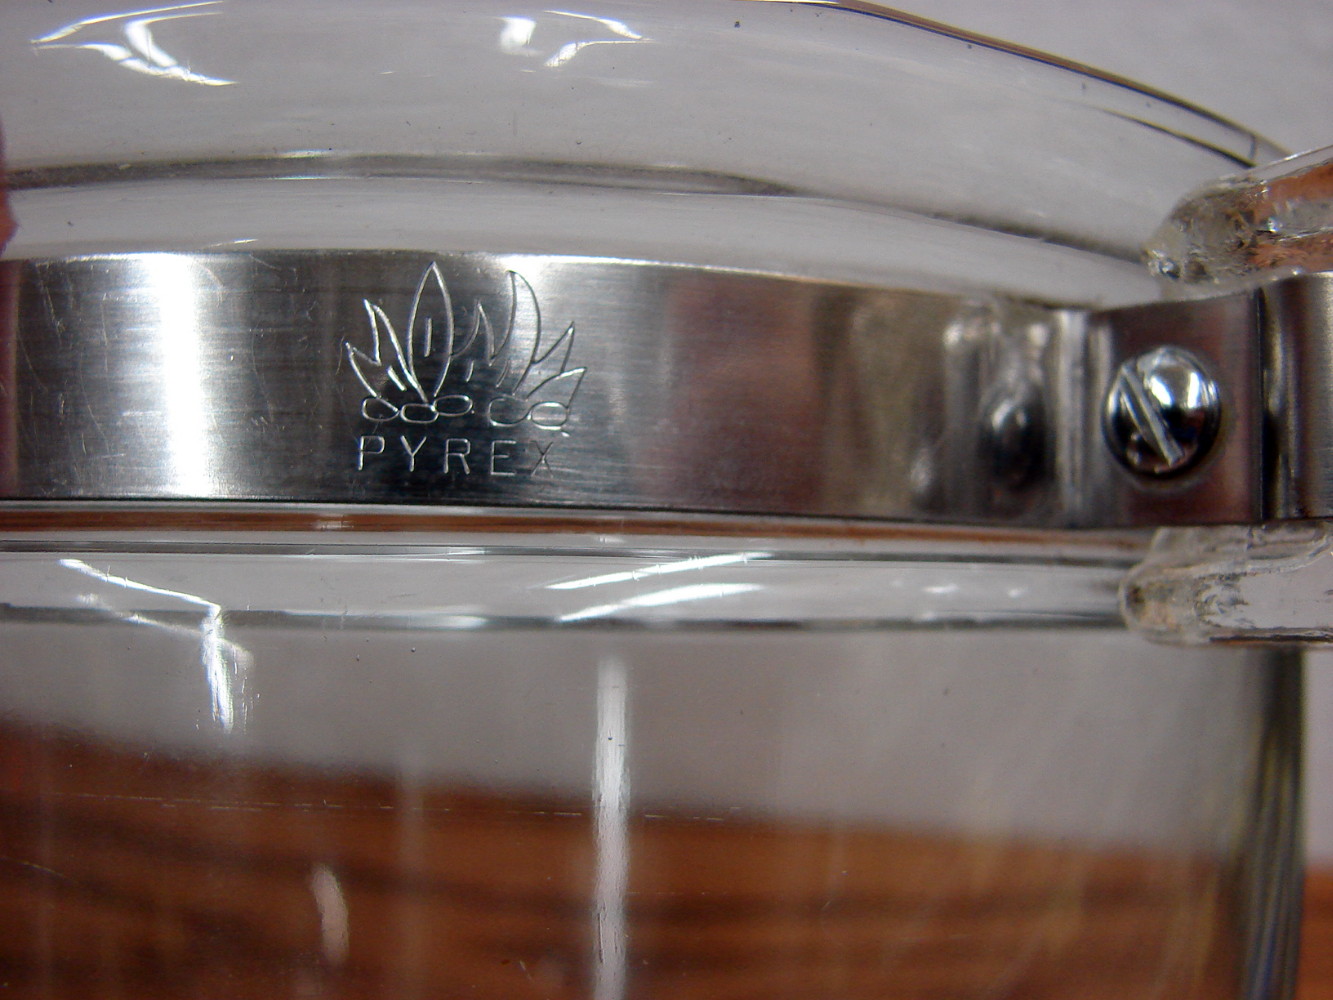 Made in USA Vintage Pyrex Clear Glass Double Boiler Cooking Pot